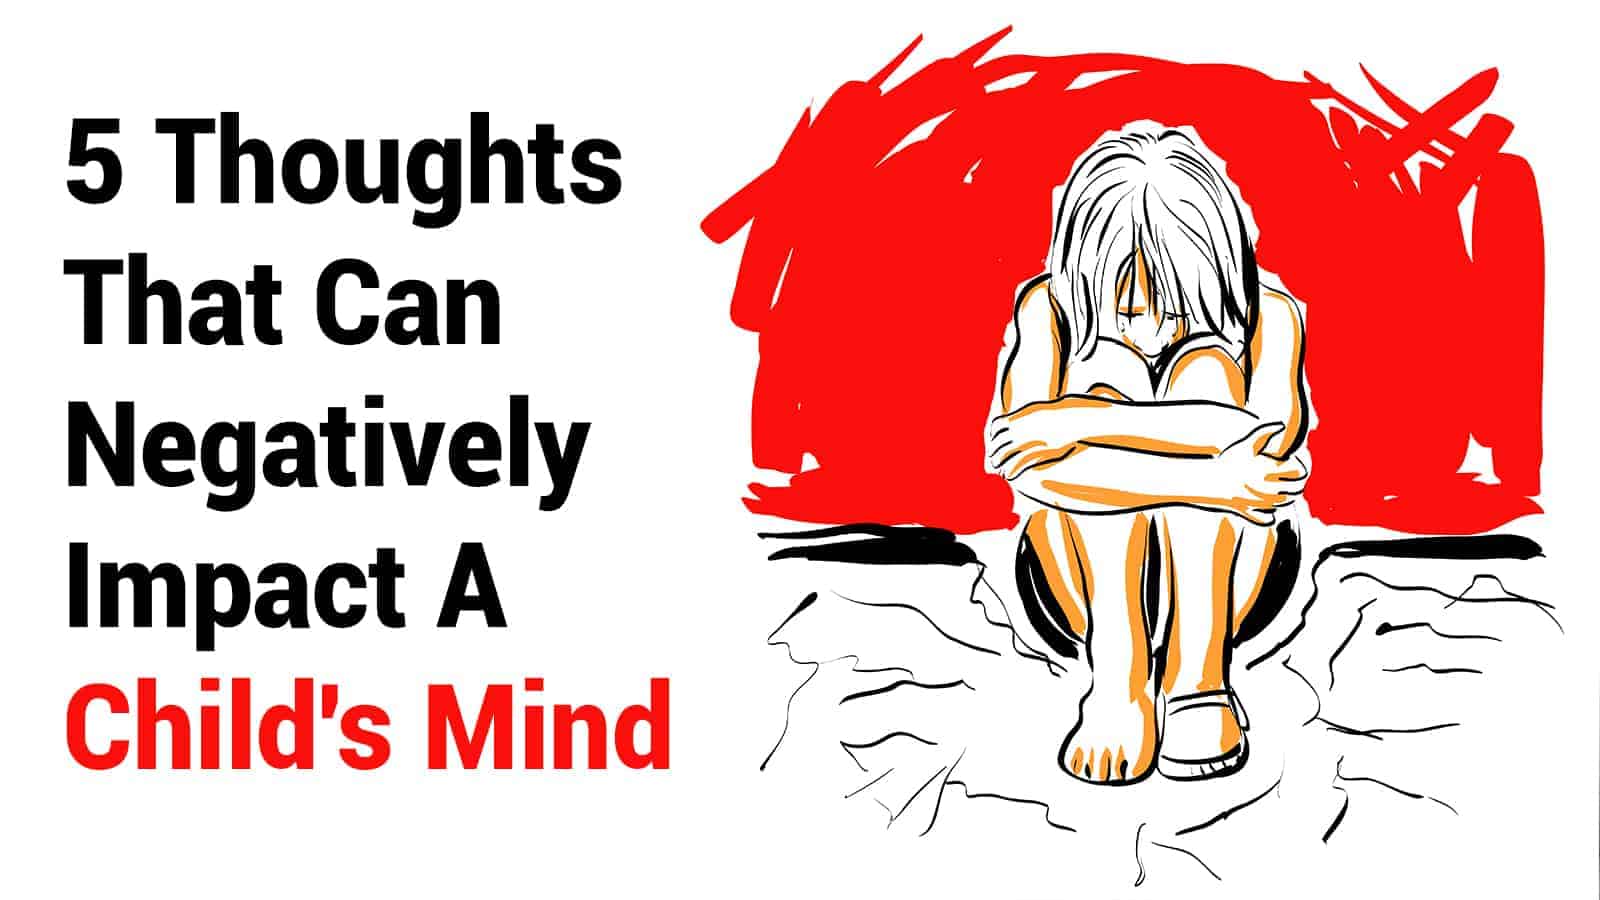 5 Thoughts That Can Negatively Impact A Child’s Mind